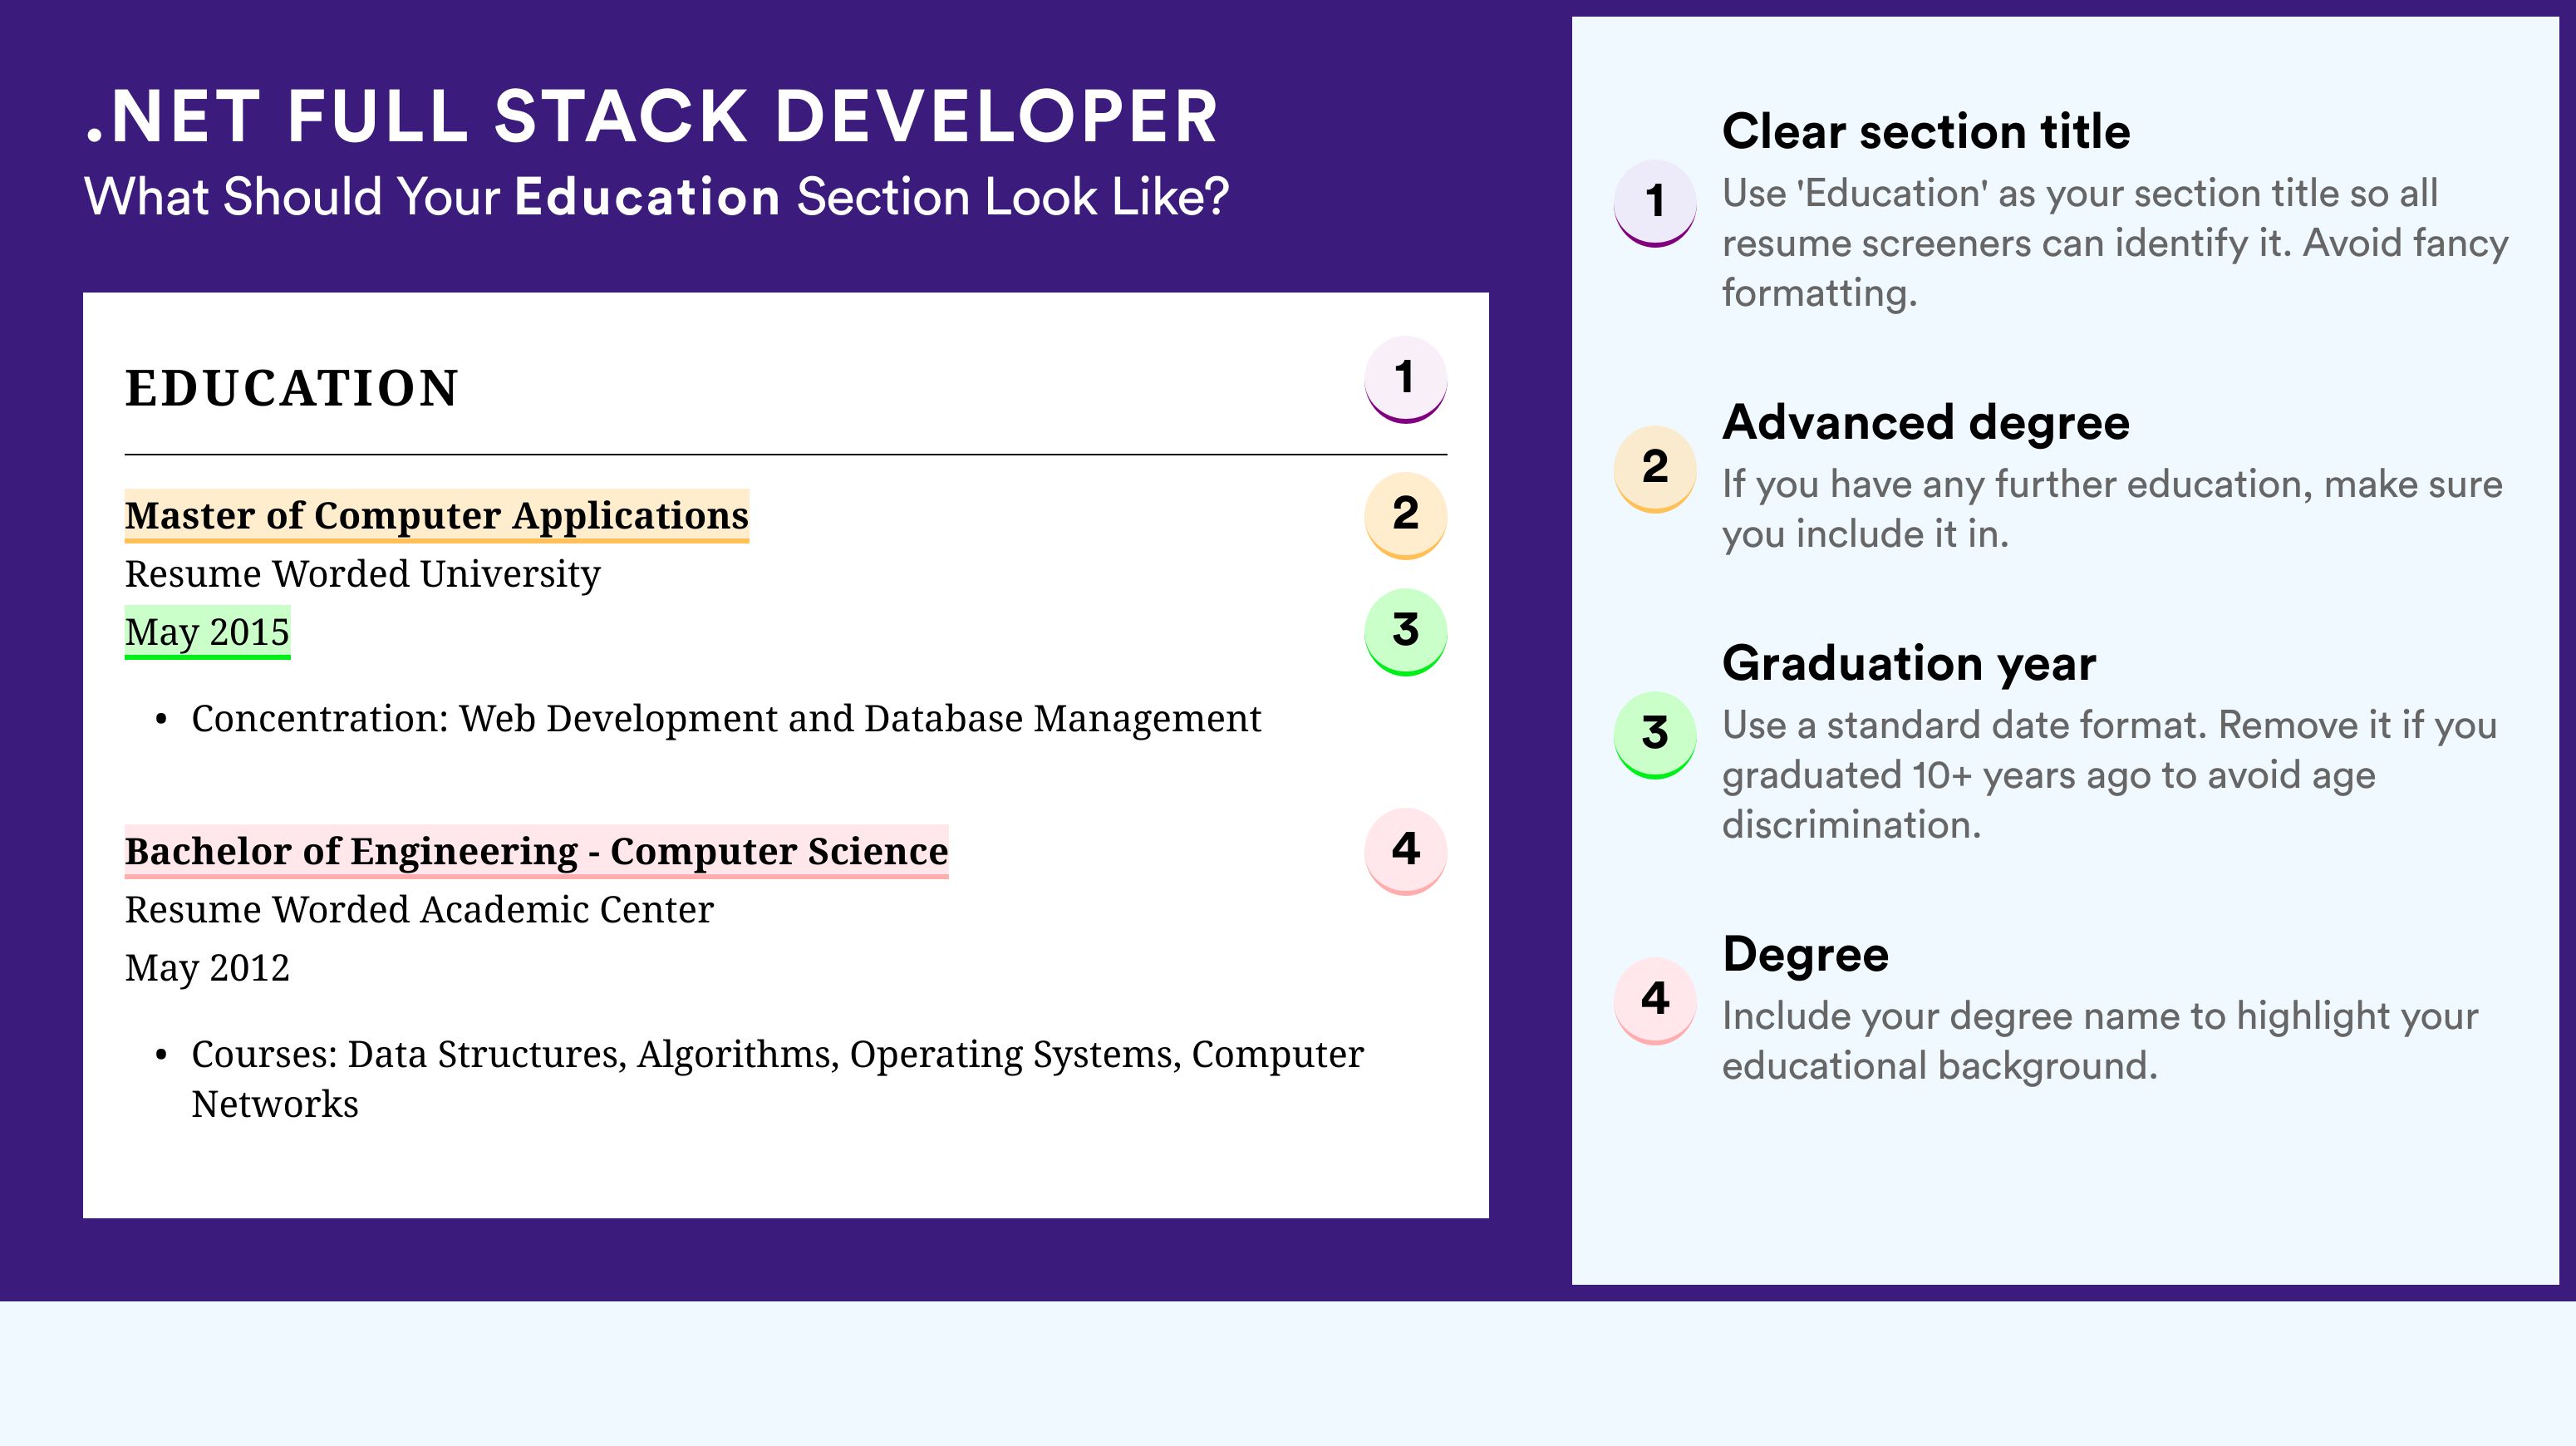 How To Write An Education Section - .NET Full Stack Developer Roles